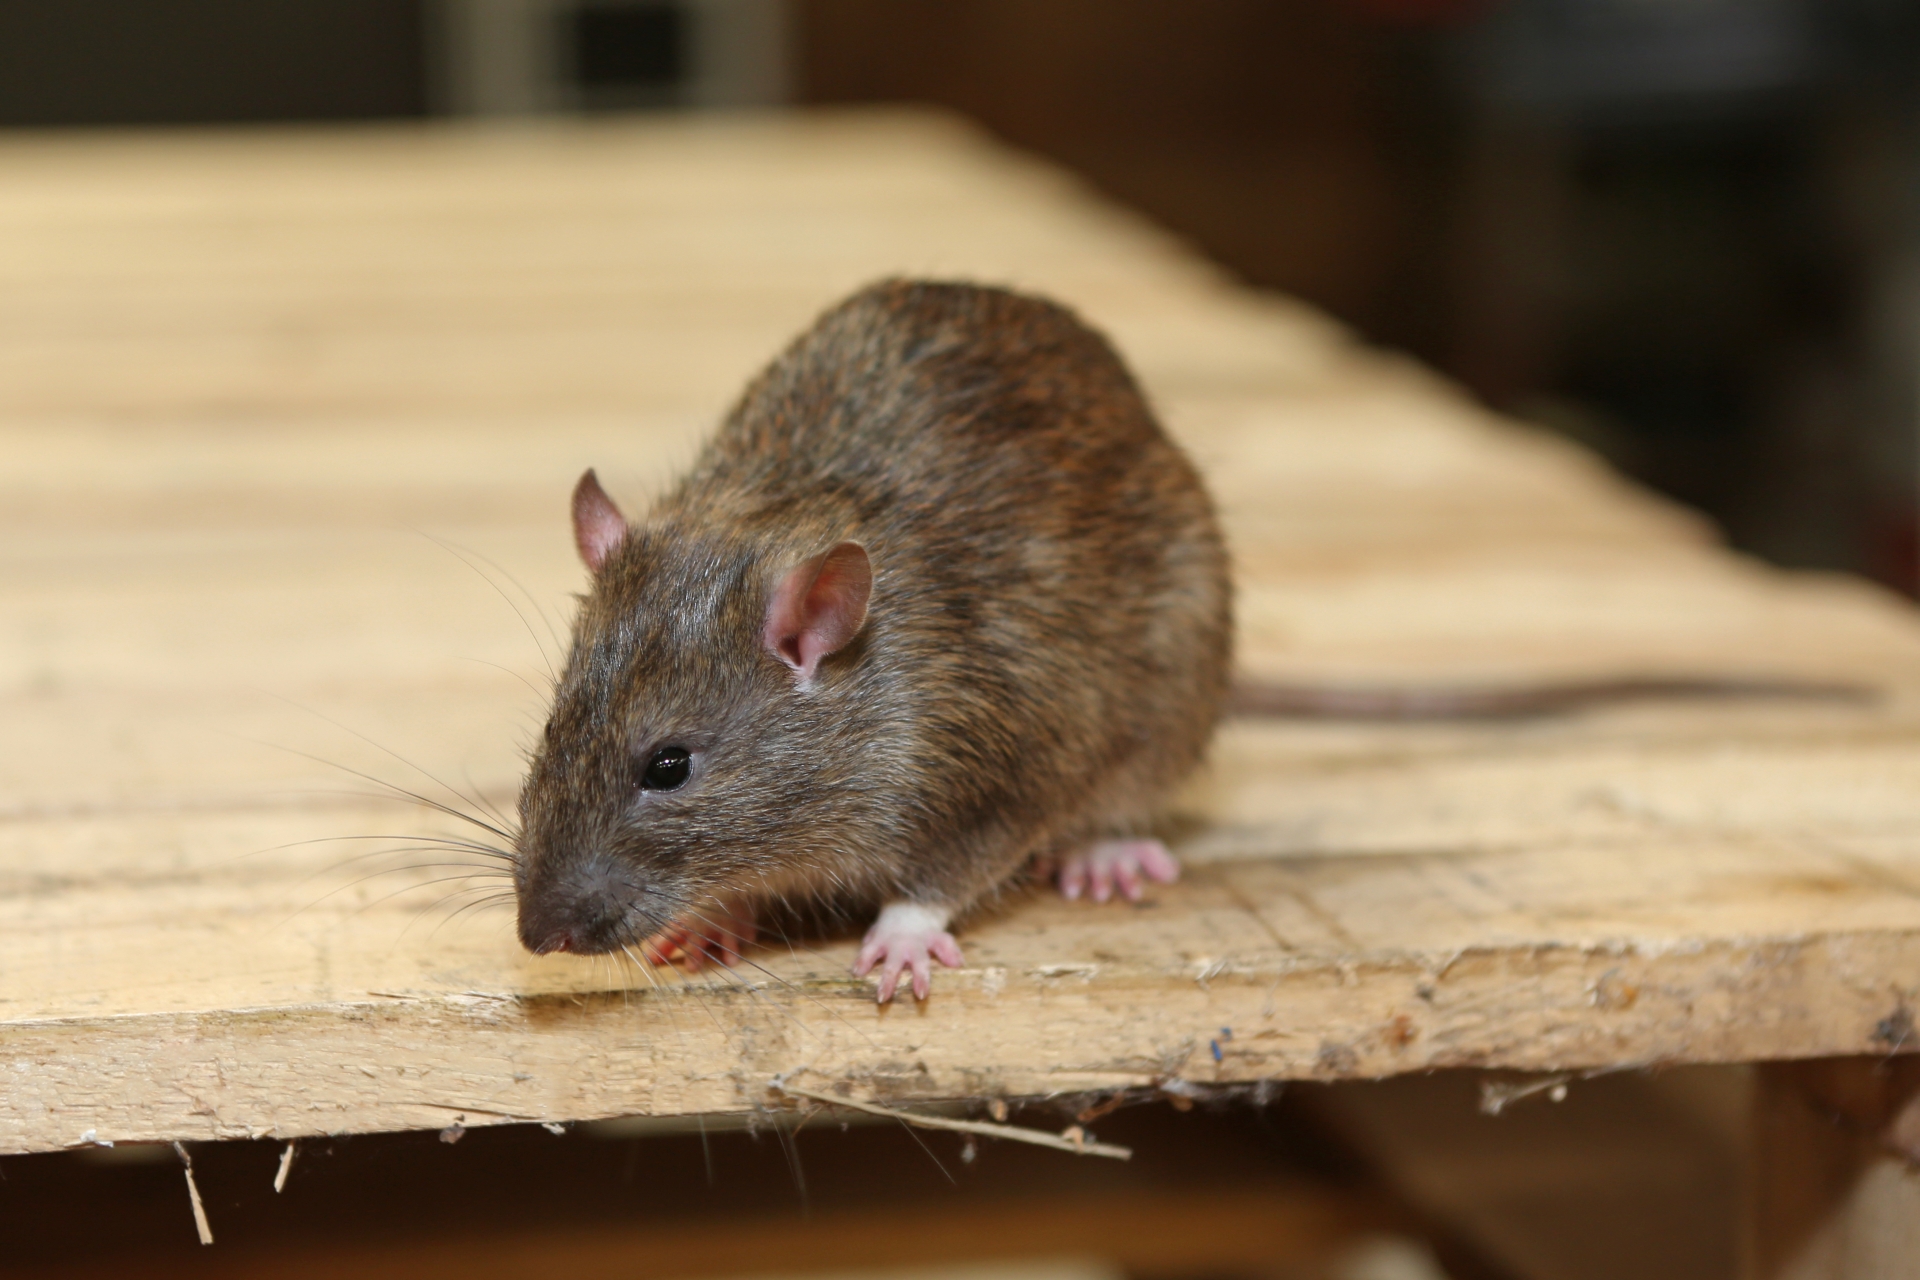 Rat extermination, Pest Control in Holborn, Strand, Covent Garden, WC2. Call Now 020 8166 9746